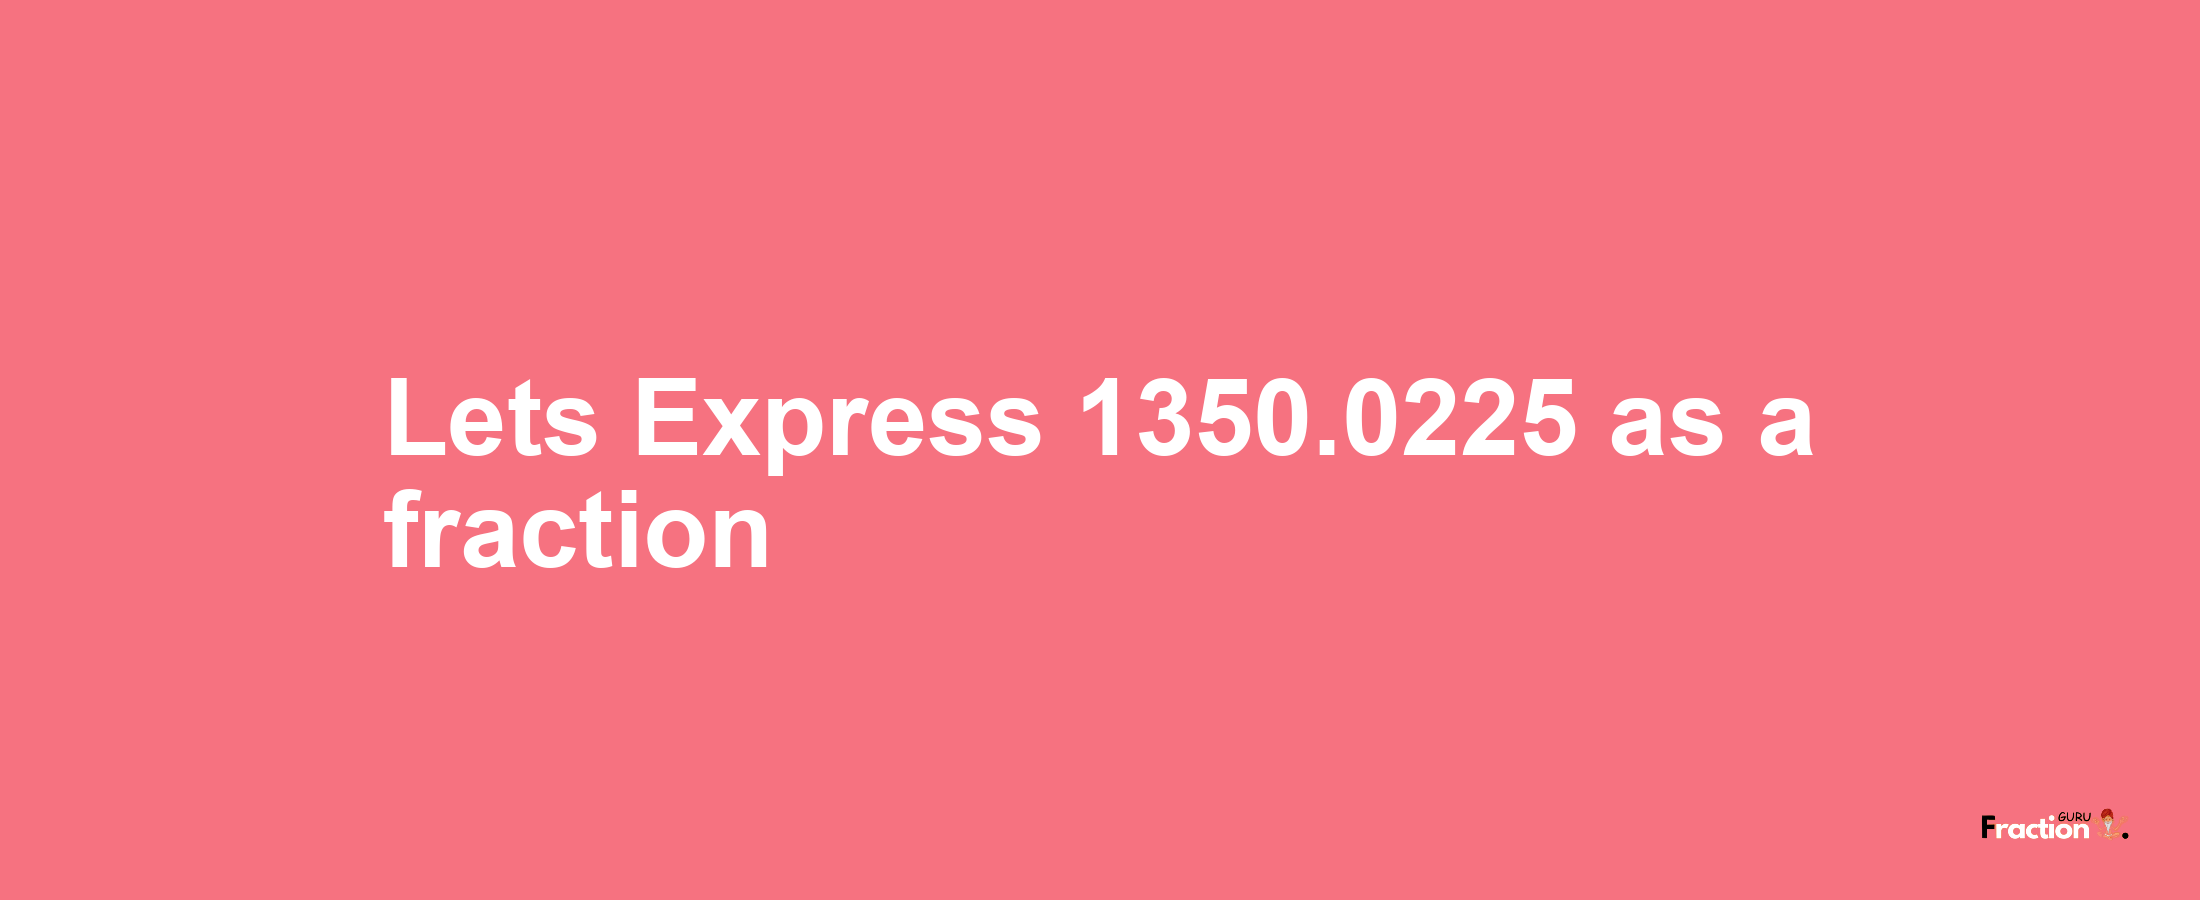 Lets Express 1350.0225 as afraction